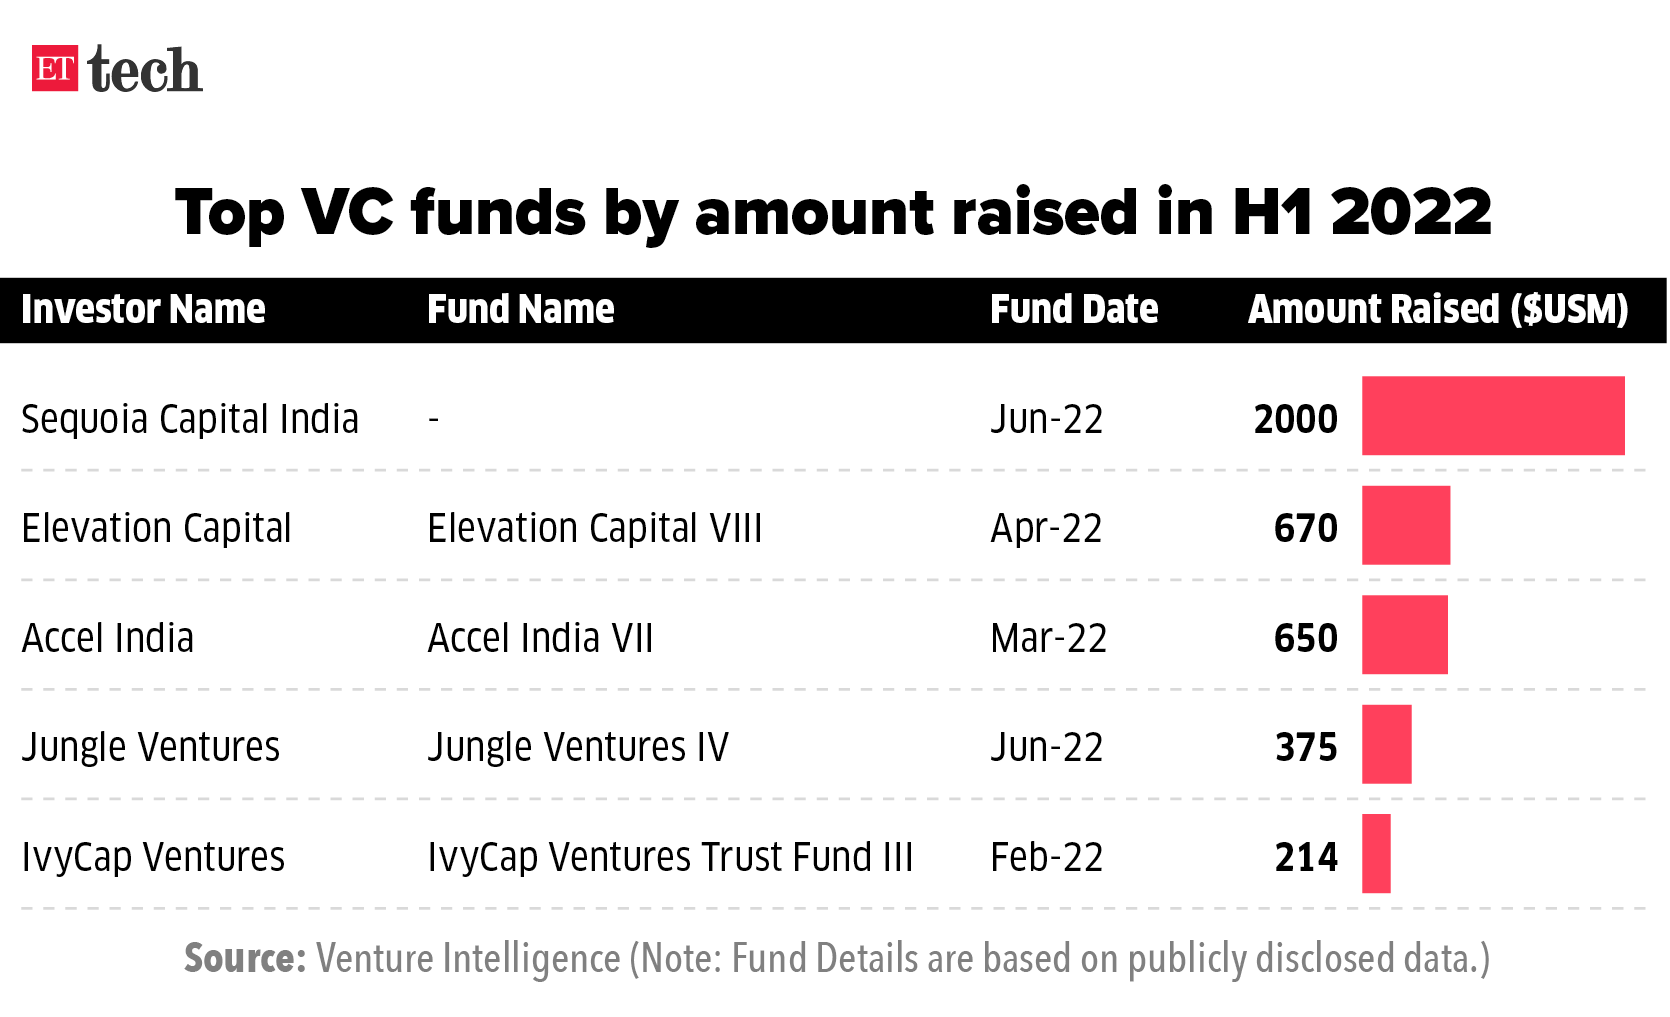 Top VC funds by amount raised in H1 2022